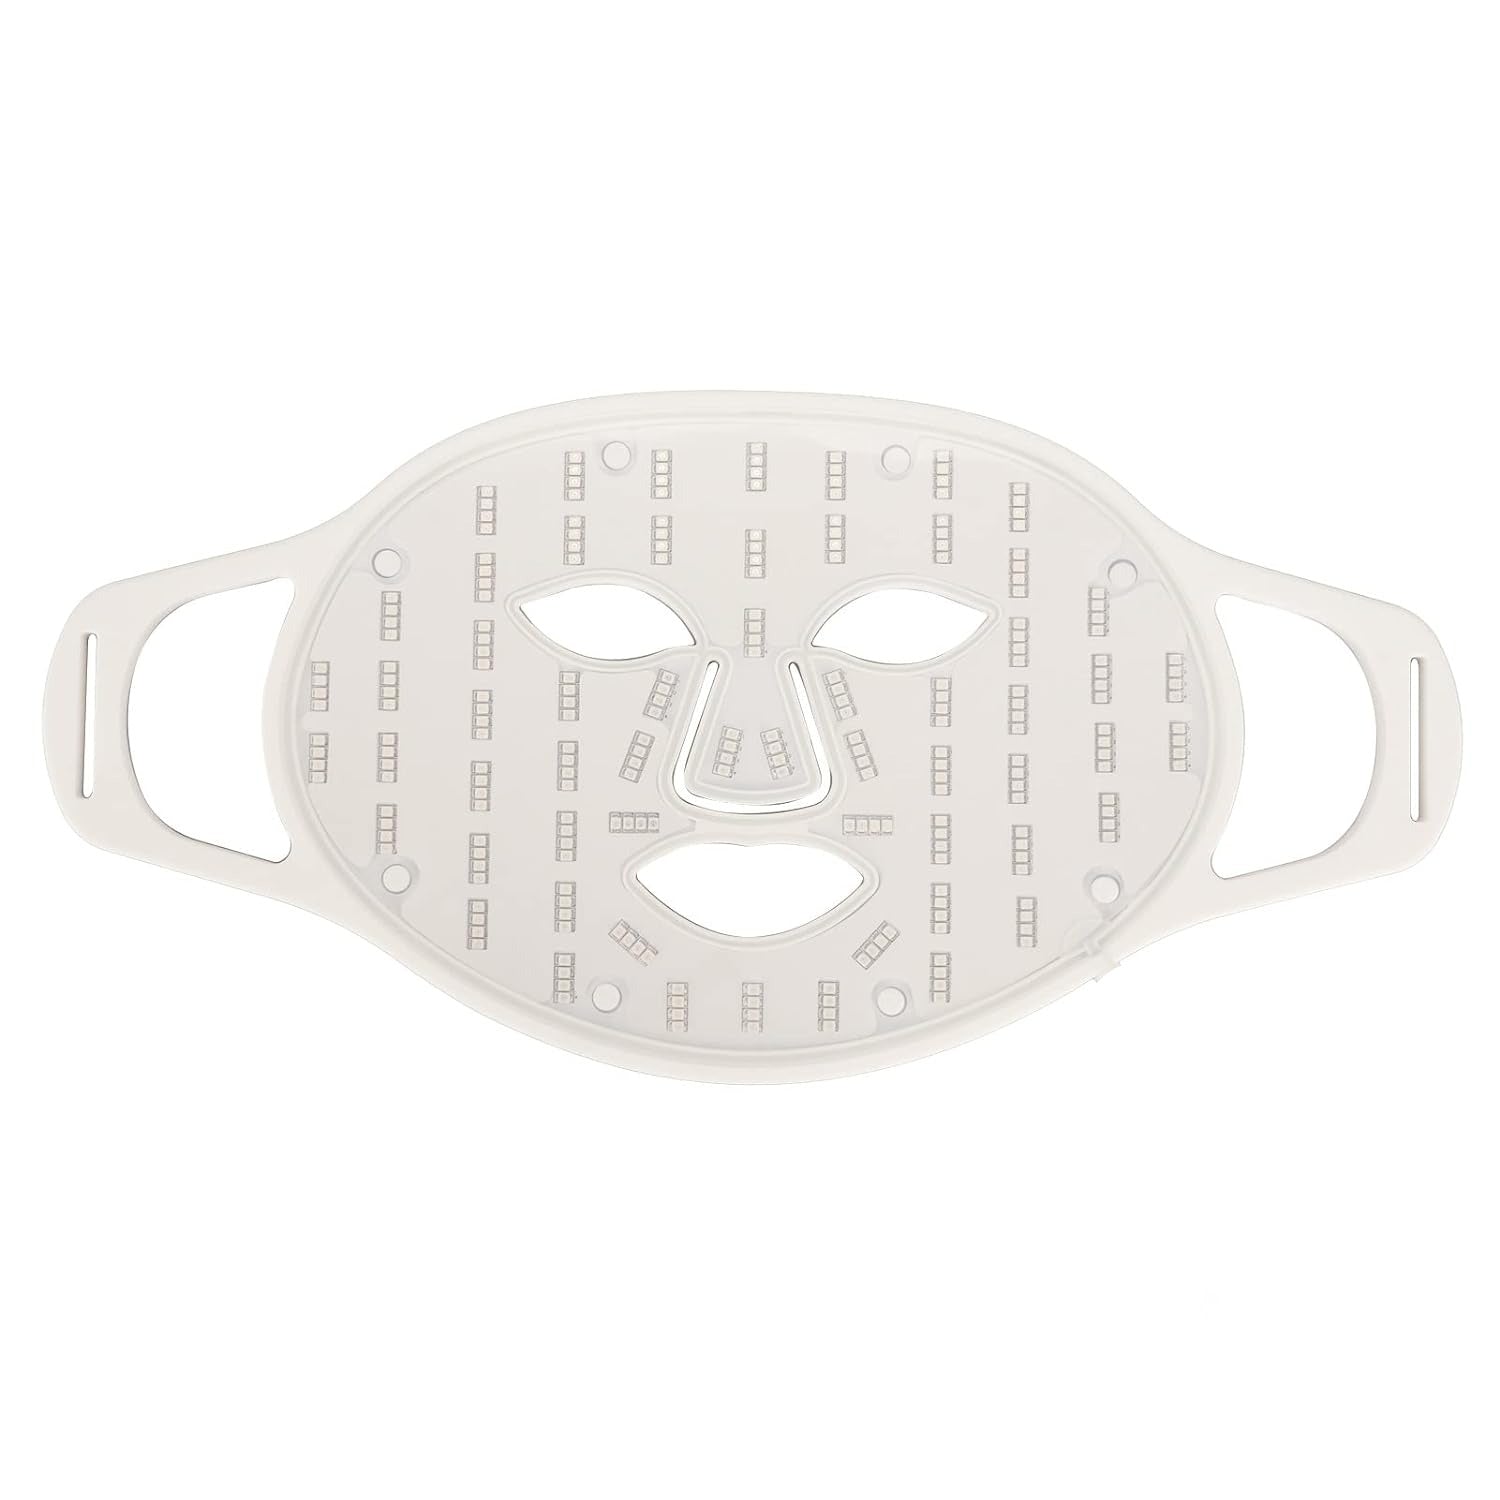 The inside silicone internal of the LED Light Therapy Mask